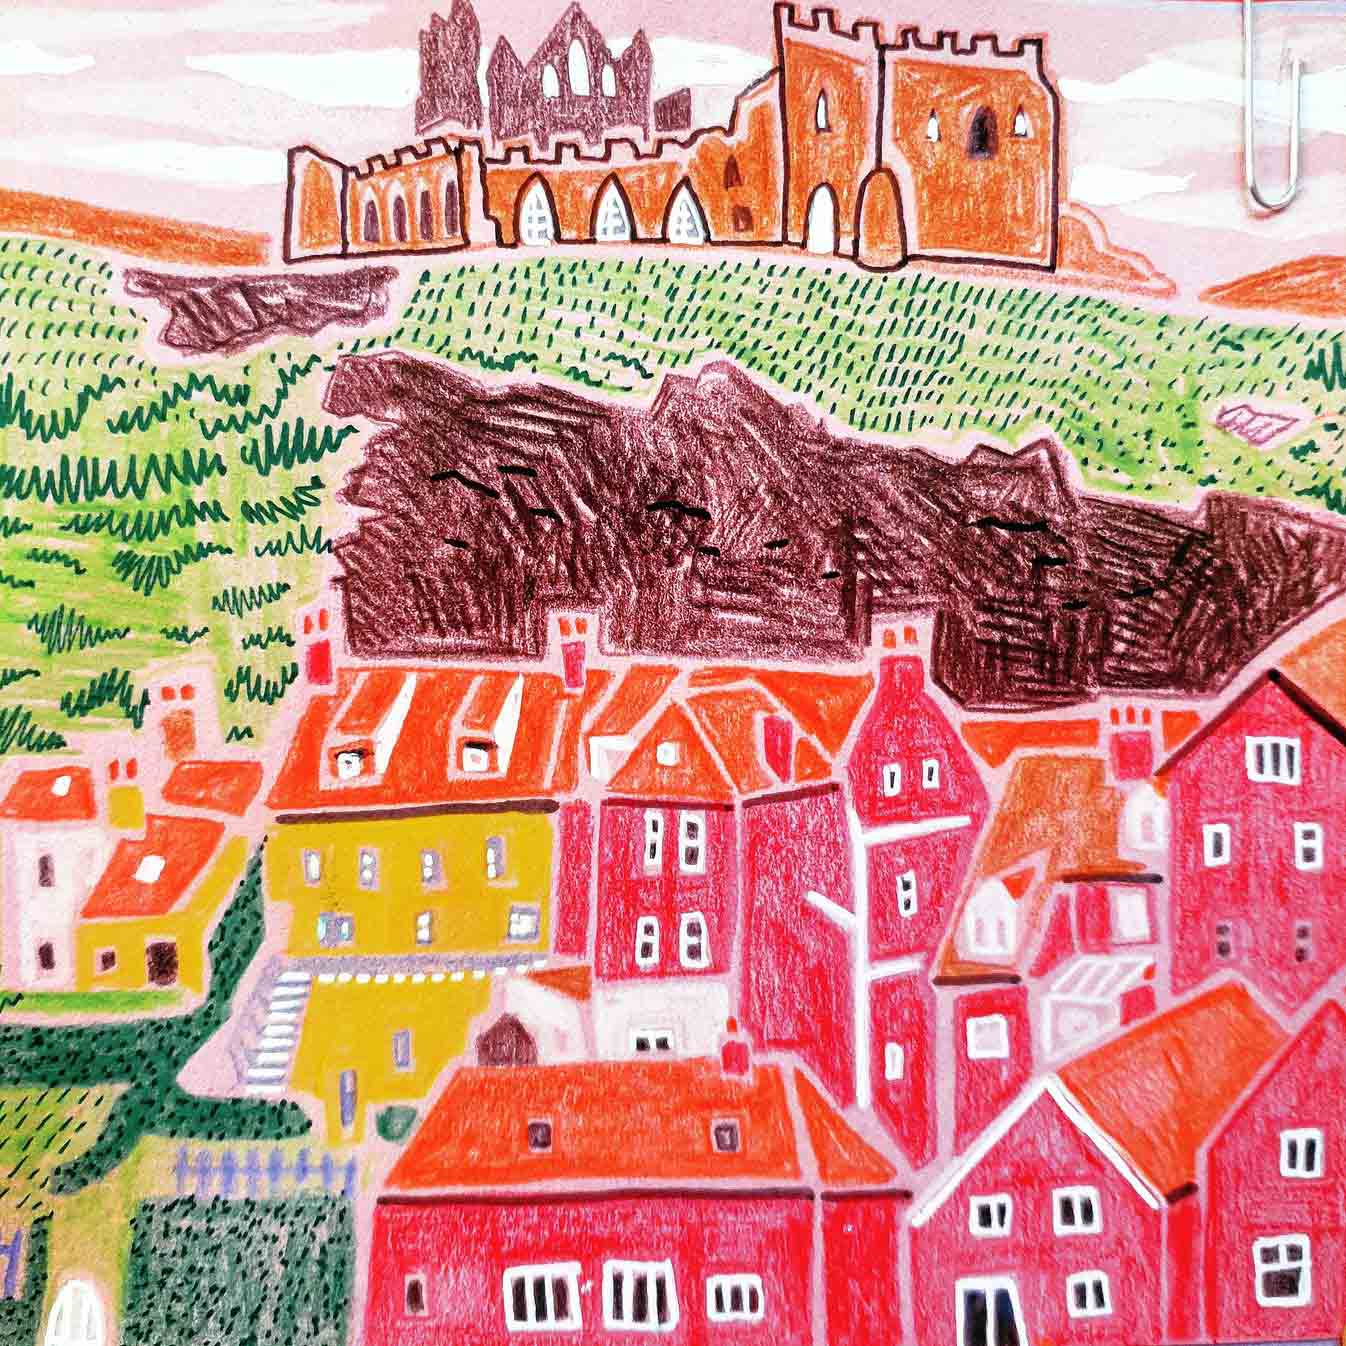 Coloured pencil illustration of St. Mary's church, Whitby.